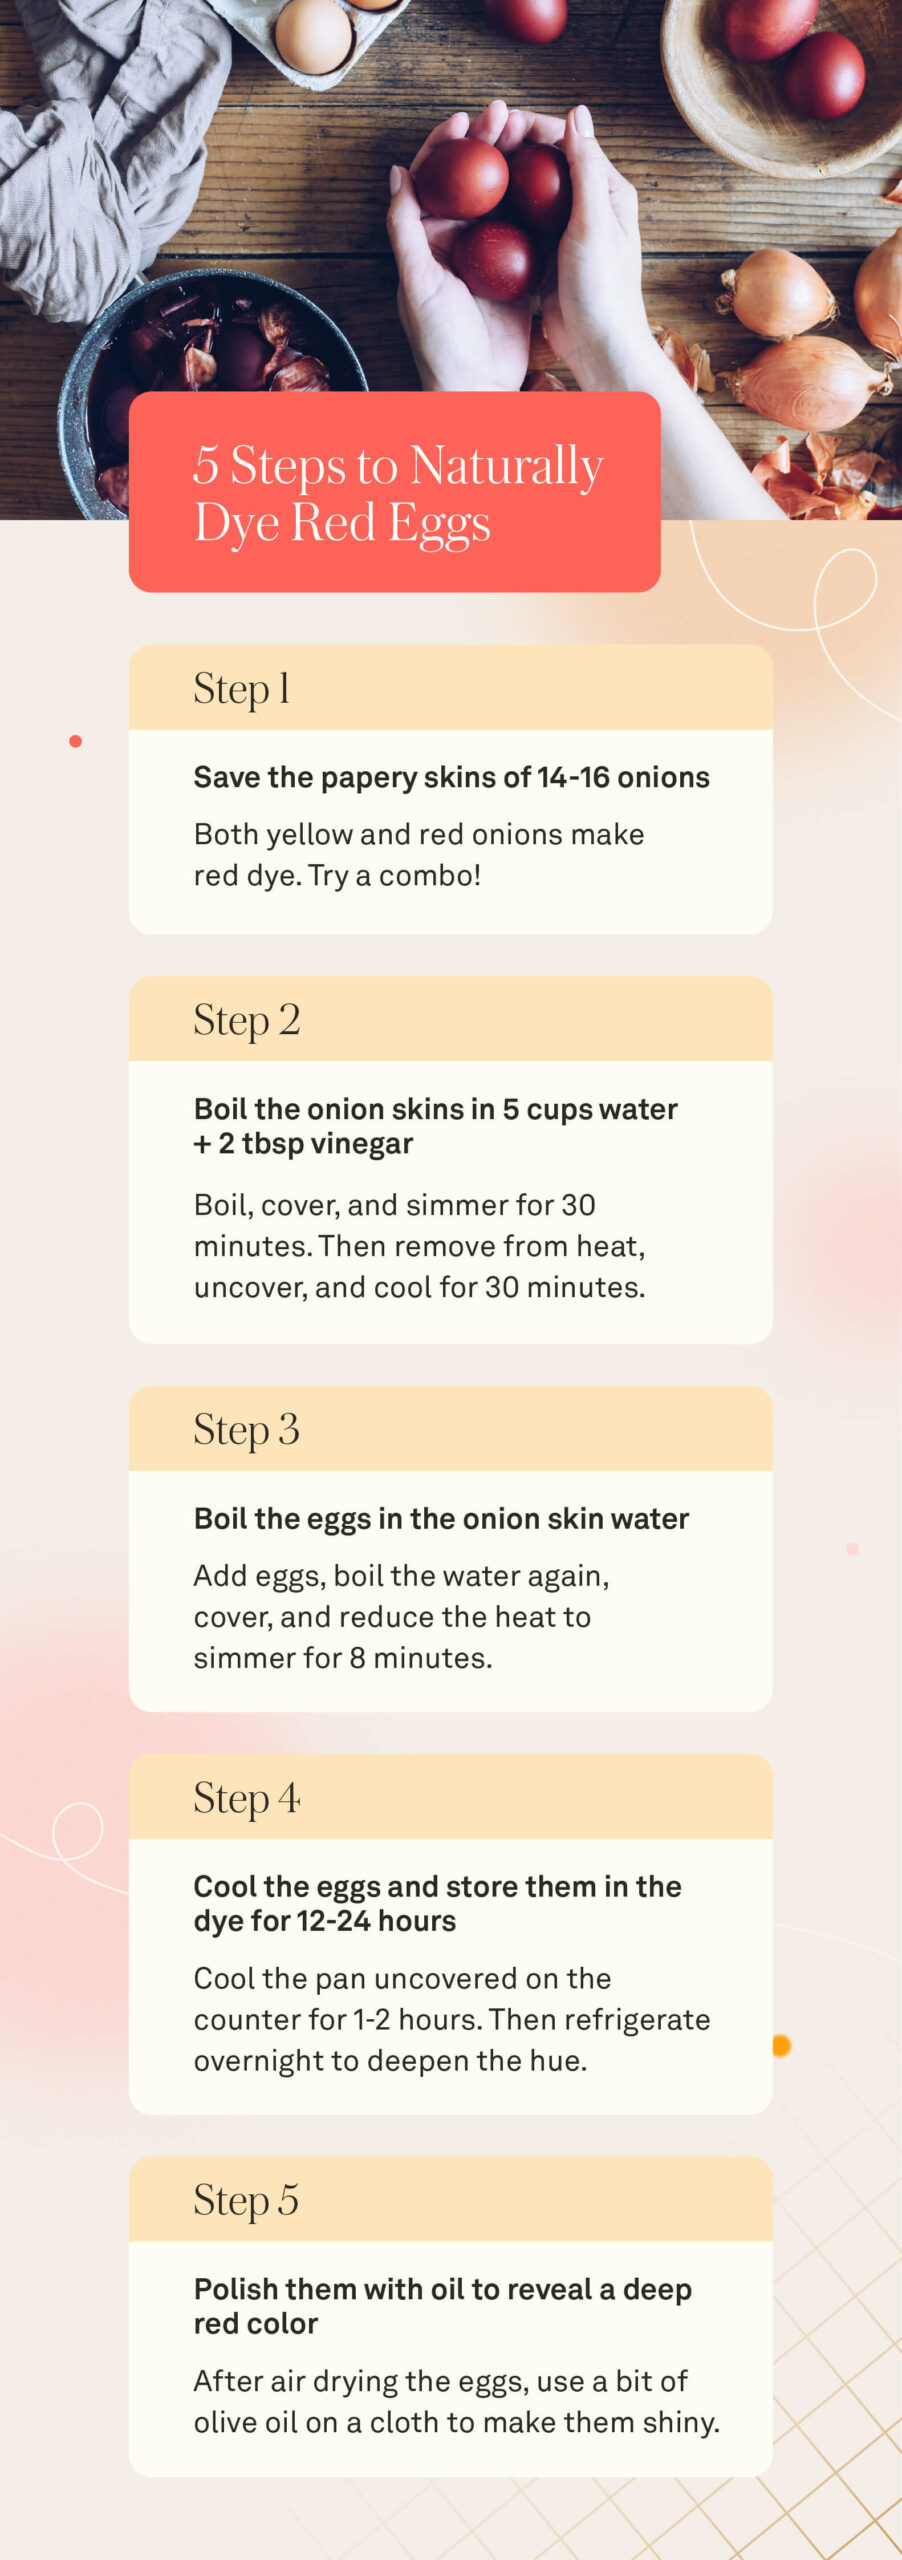 5-step instructions for naturally dying eggs red